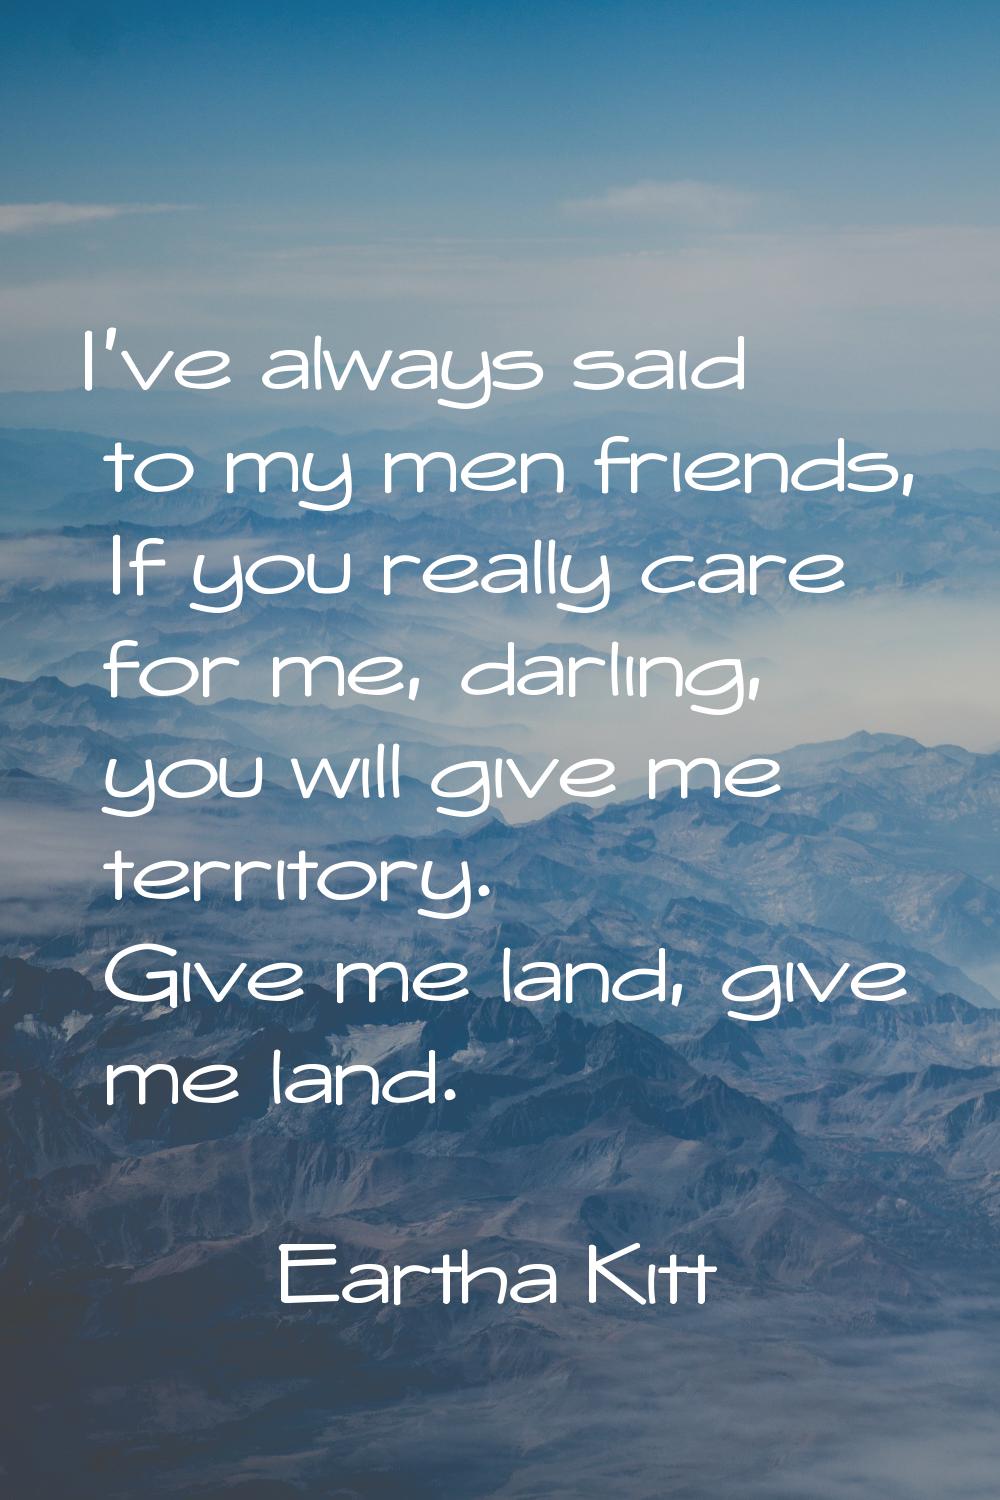 I've always said to my men friends, If you really care for me, darling, you will give me territory.